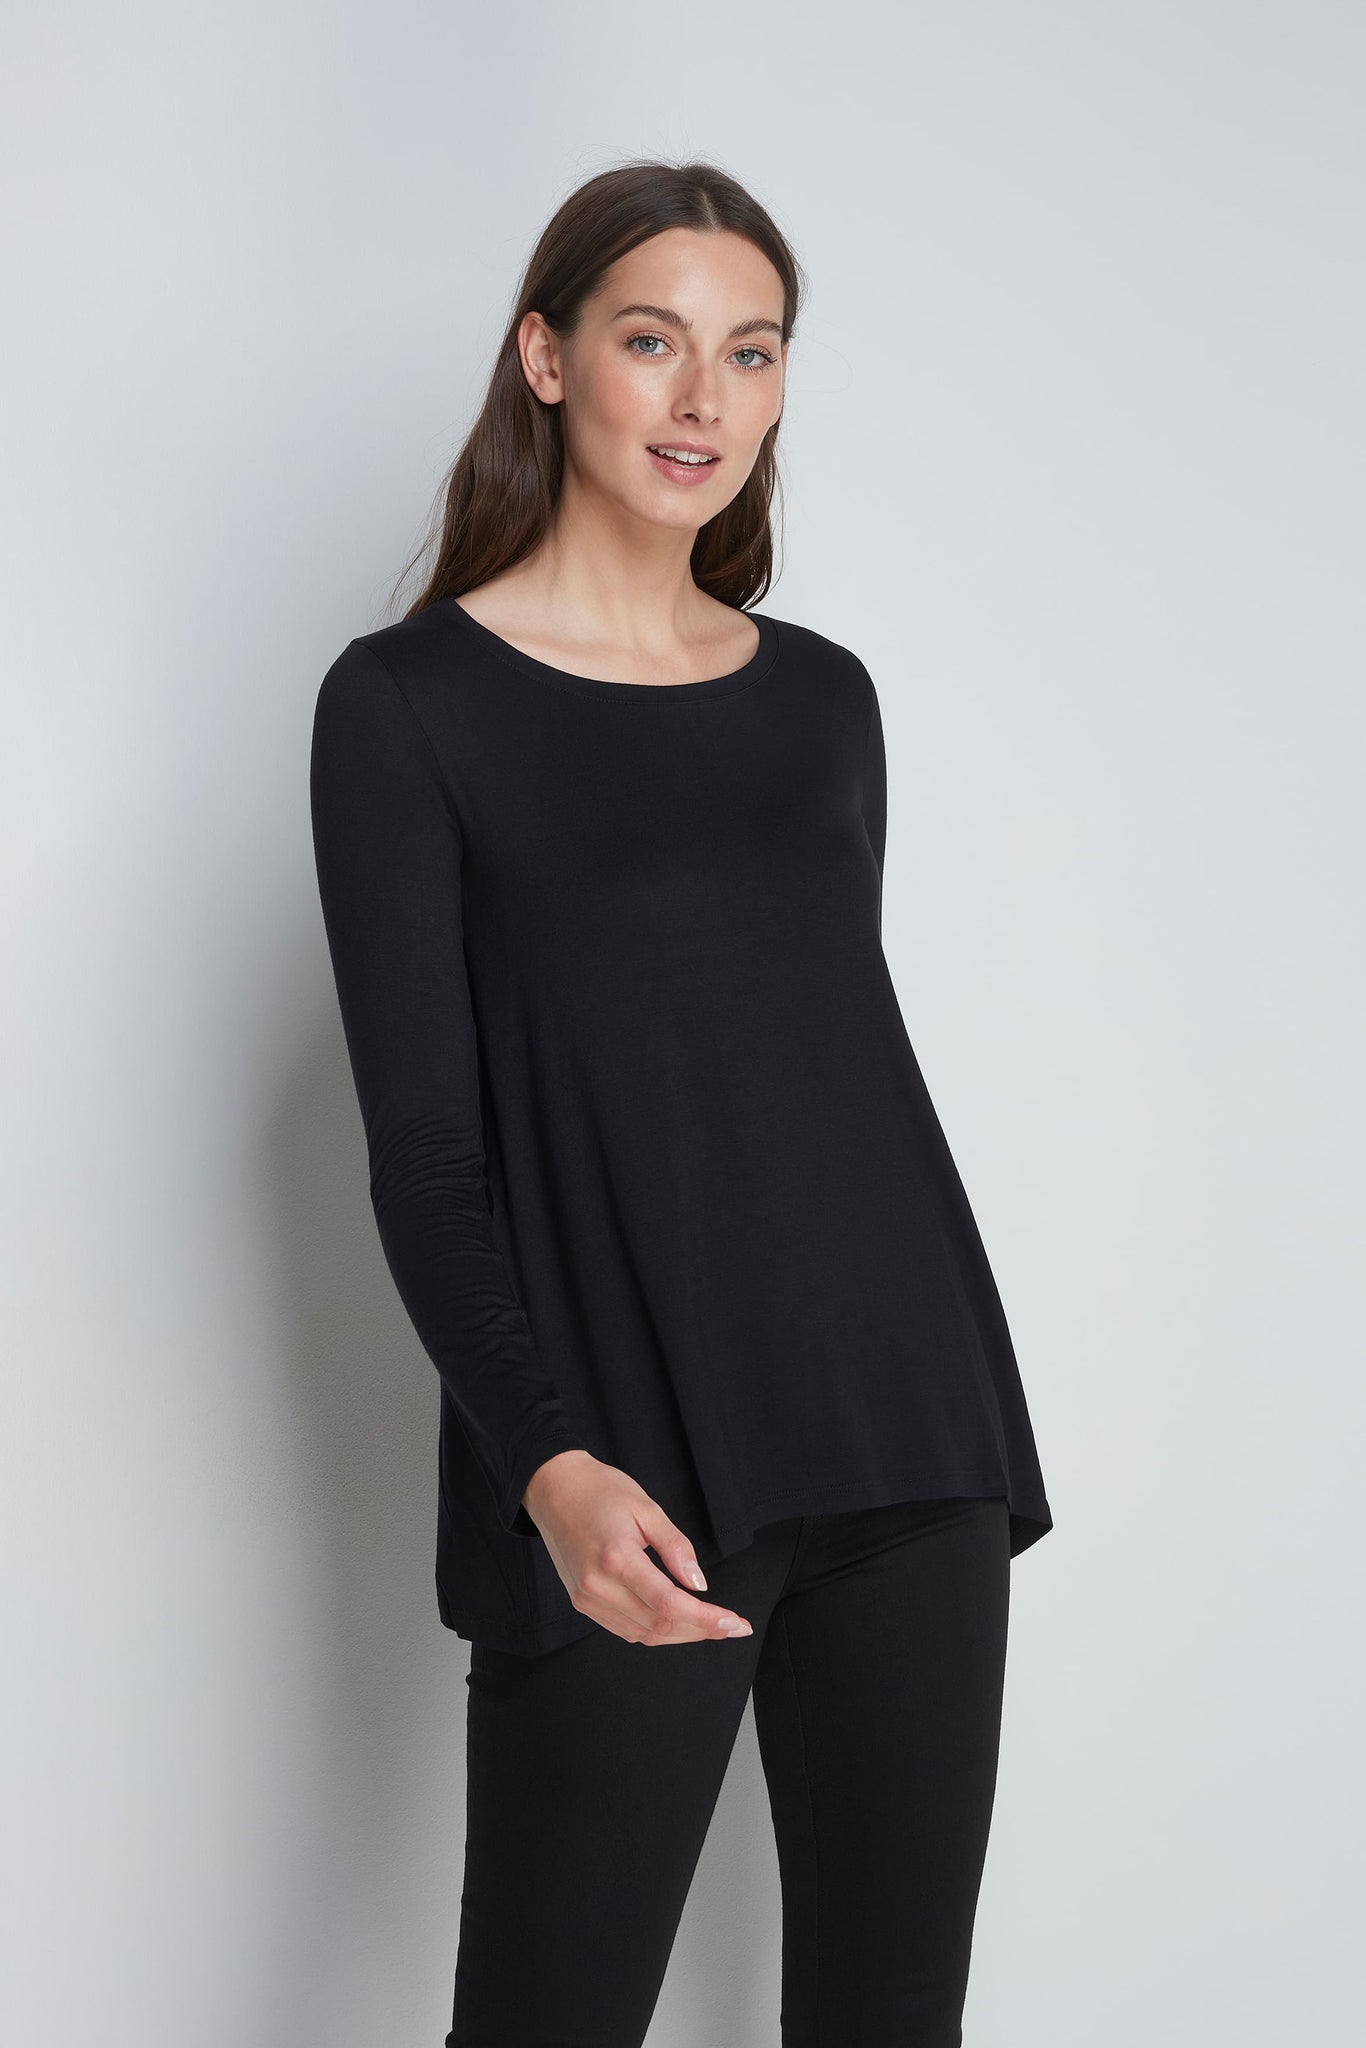 Women's Micro Modal Soft Flattering Long Sleeve Black A-Line Top by Lavender Hill Clothing